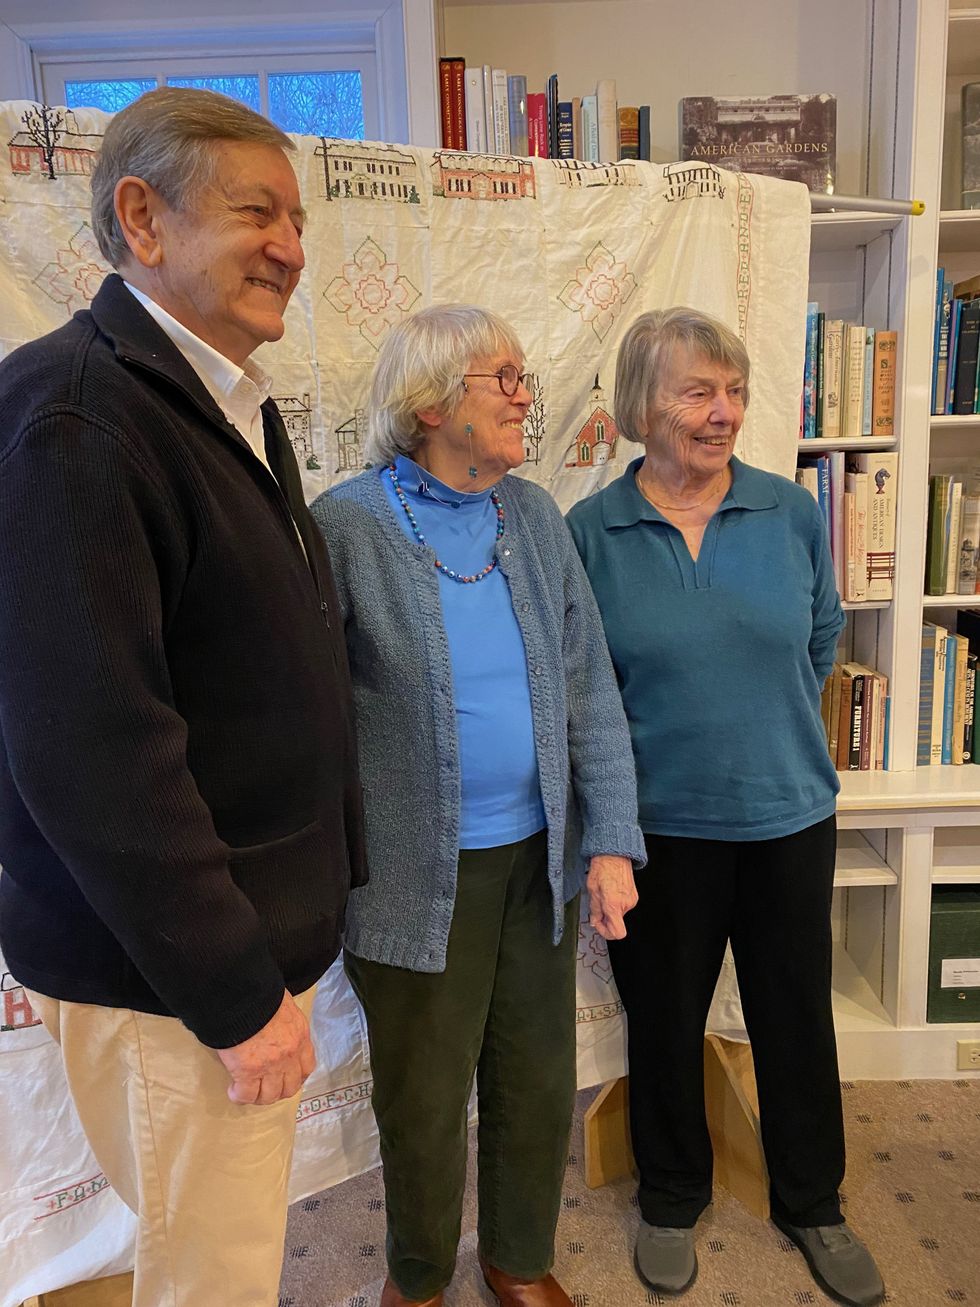 Historical Society: Sharing stories of life in Sharon